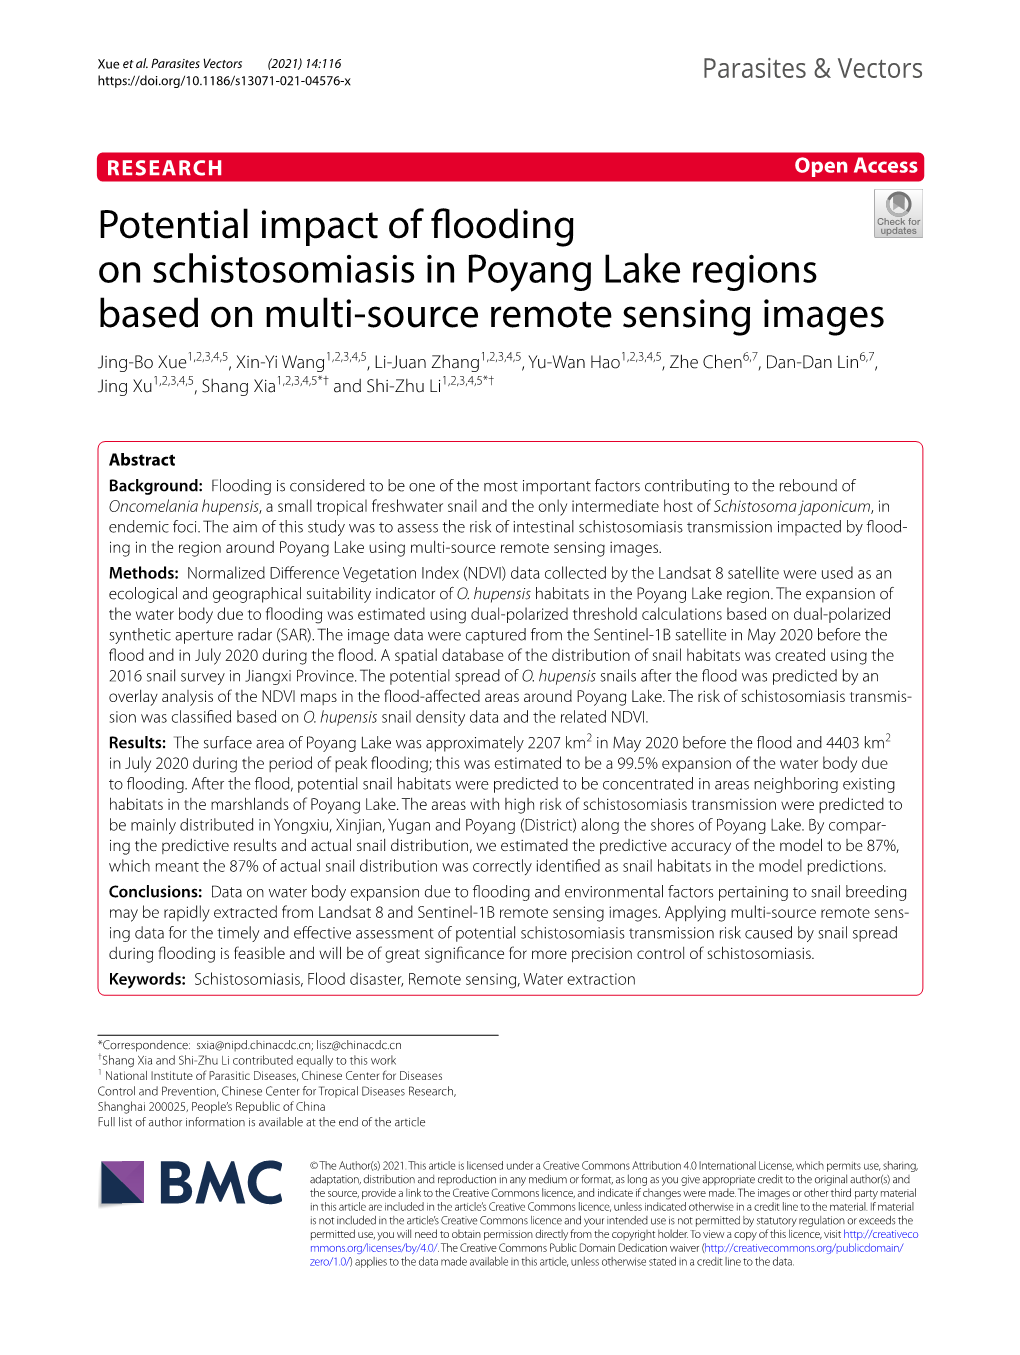 Potential Impact of Flooding on Schistosomiasis in Poyang Lake